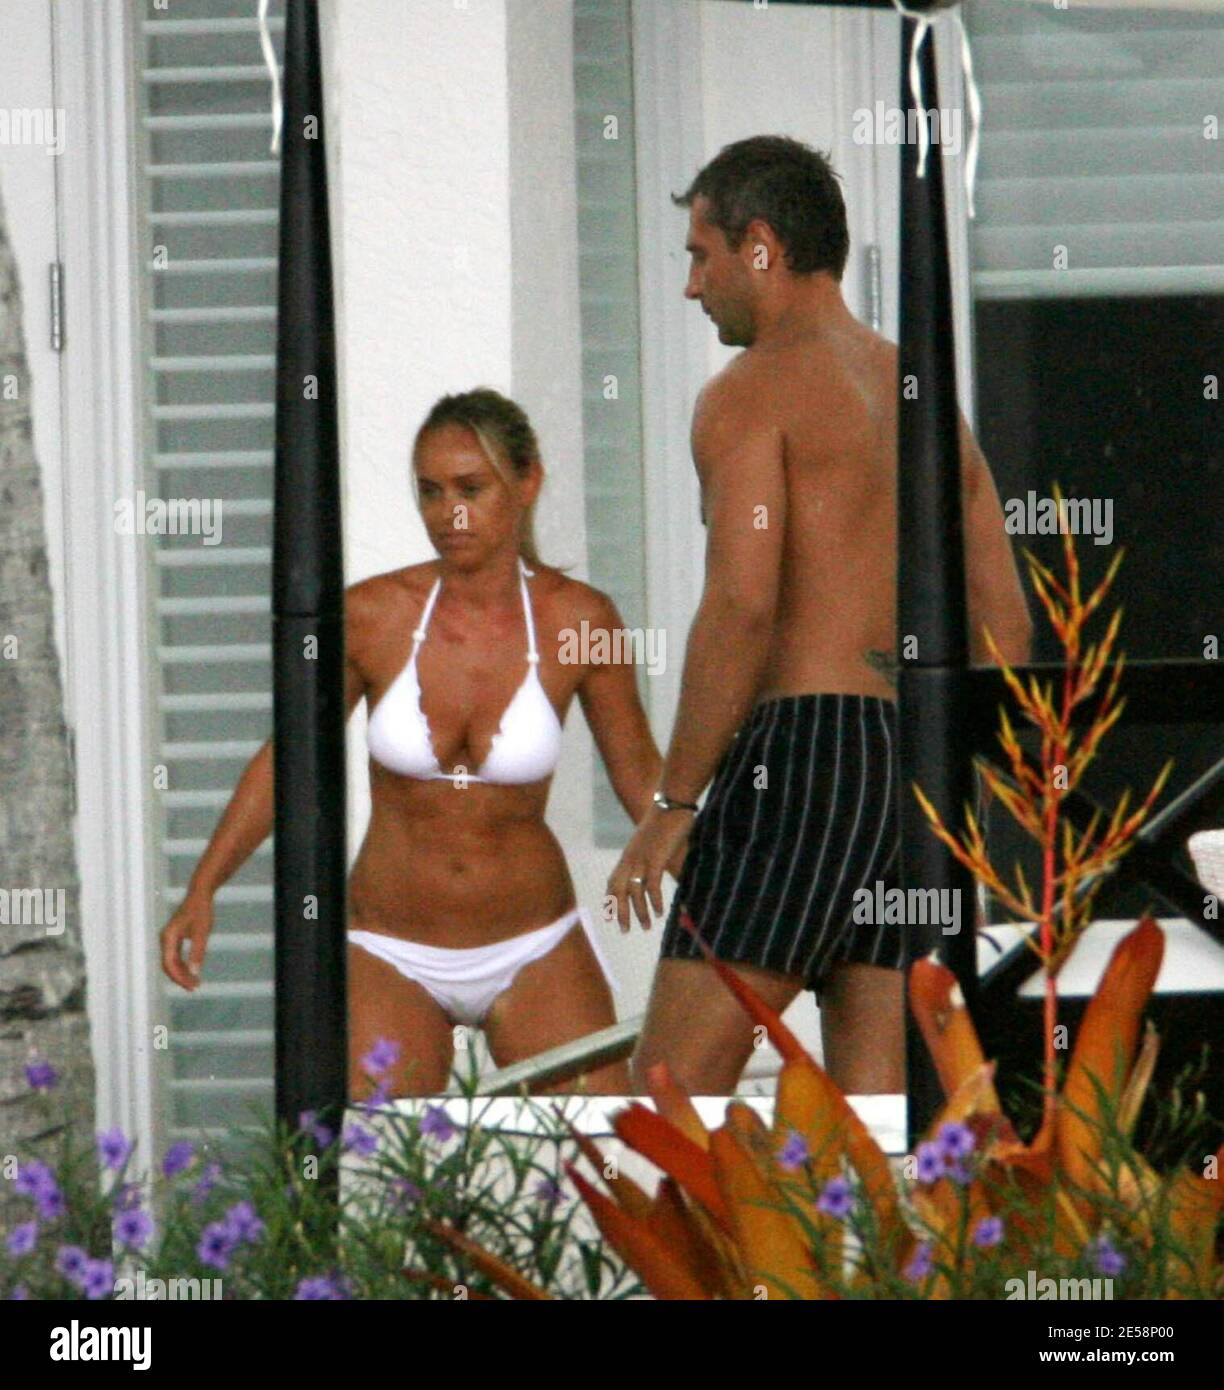 Exclusive!! Cecile de Menibus and Yann Delaigue spend time poolside with  friends at a luxury mansion in Miami Beach, FL. Cecile looked great in a  white bikini and Yan practised his rugby